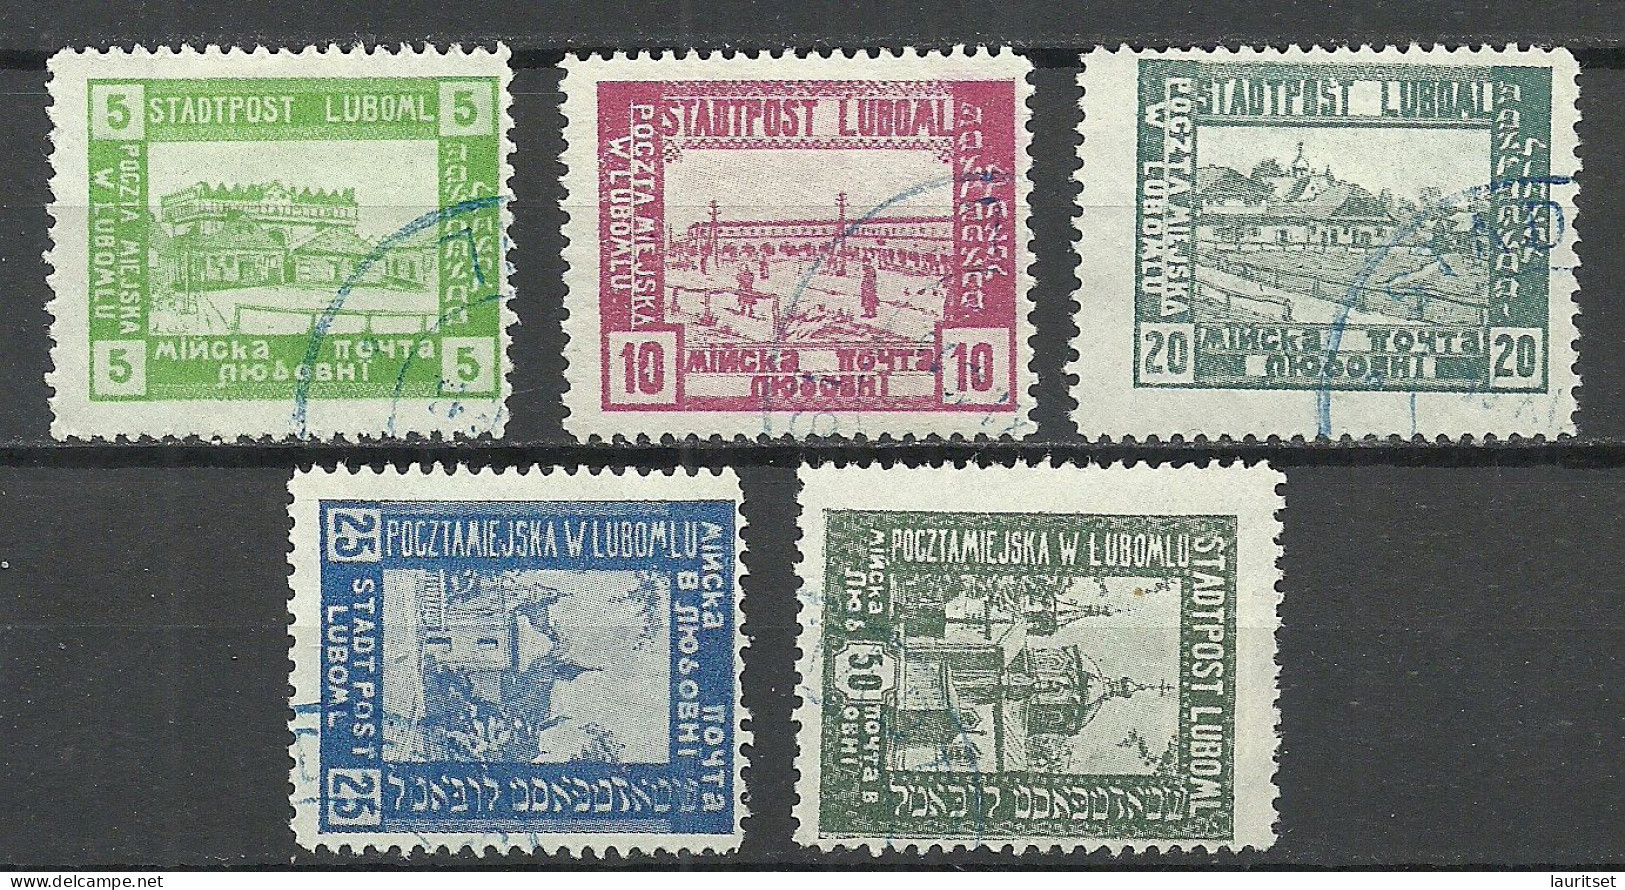 POLEN Poland 1918 LUBOML Local City Post Lokalausgabe Michel I - IV O Unissued Stadtansicht Local Post - Unused Stamps